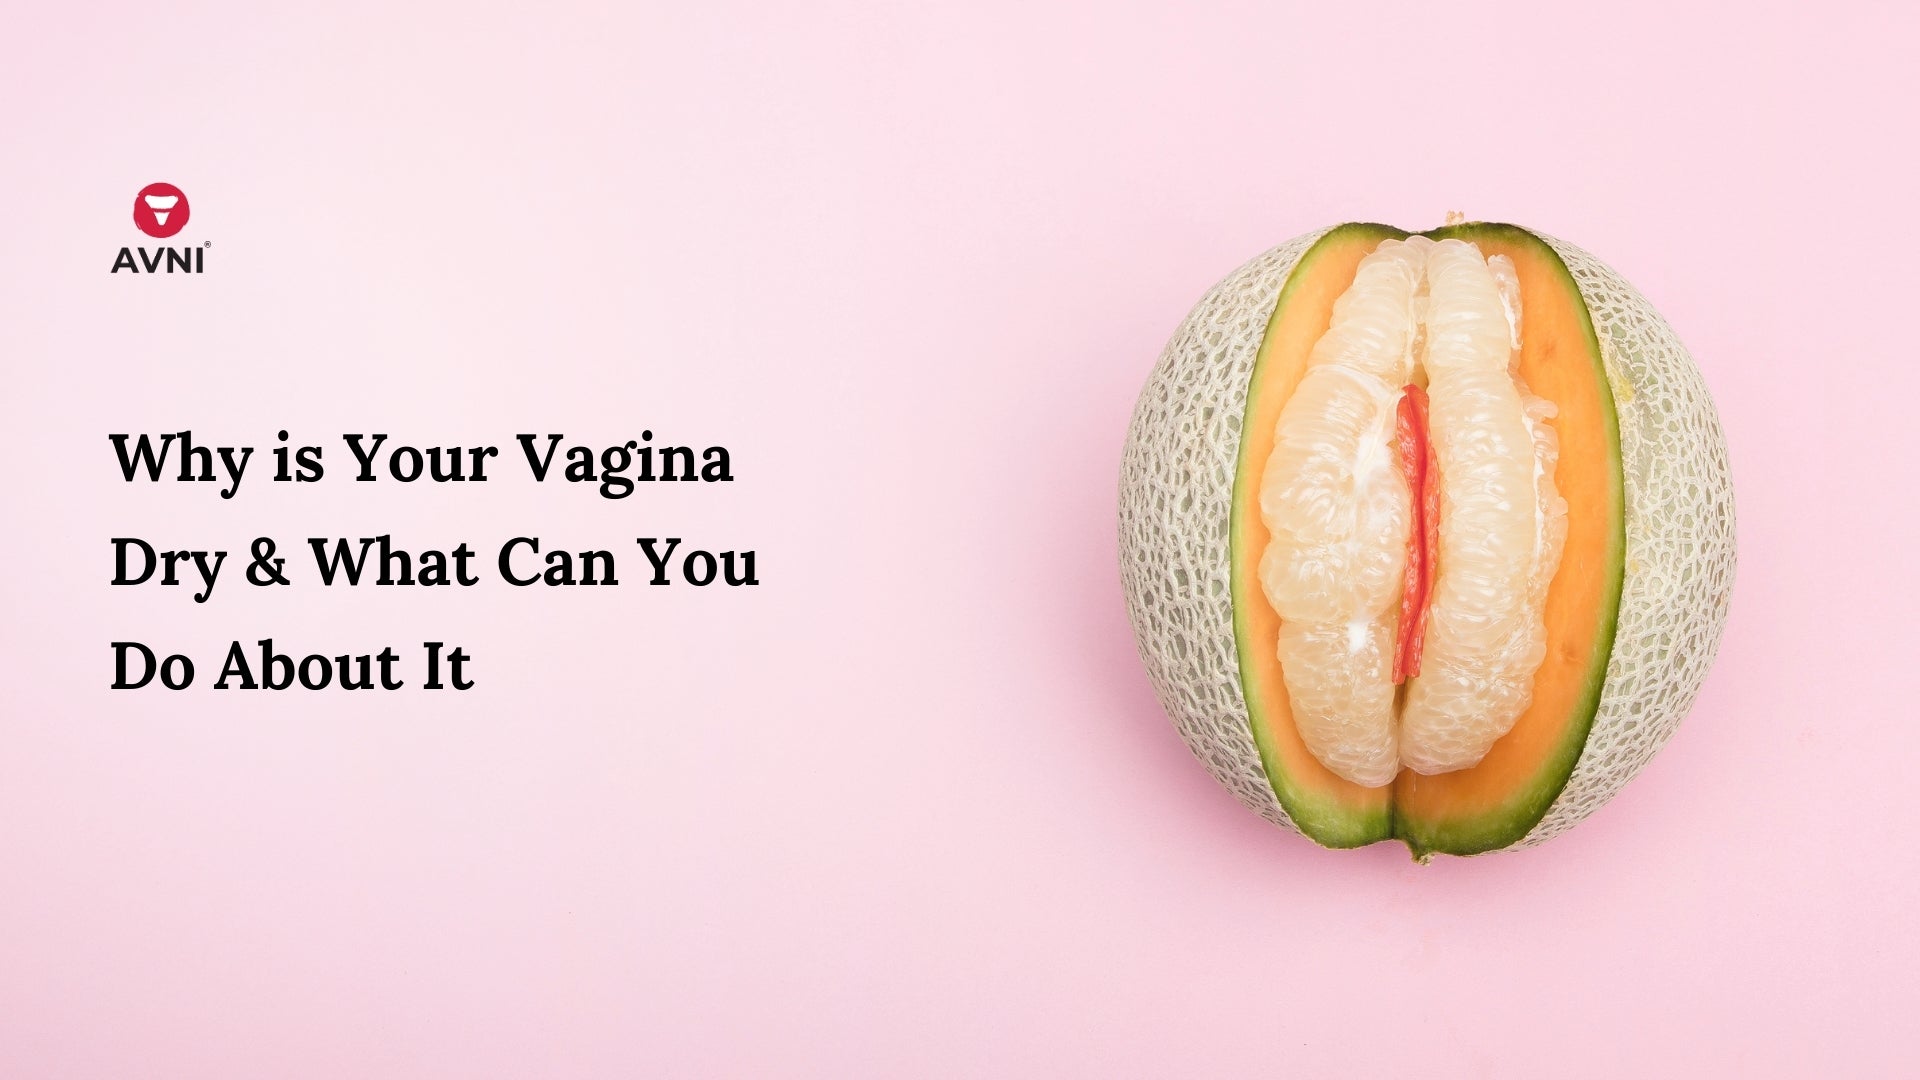 7 Things You Should Know About Vaginal Health According To A